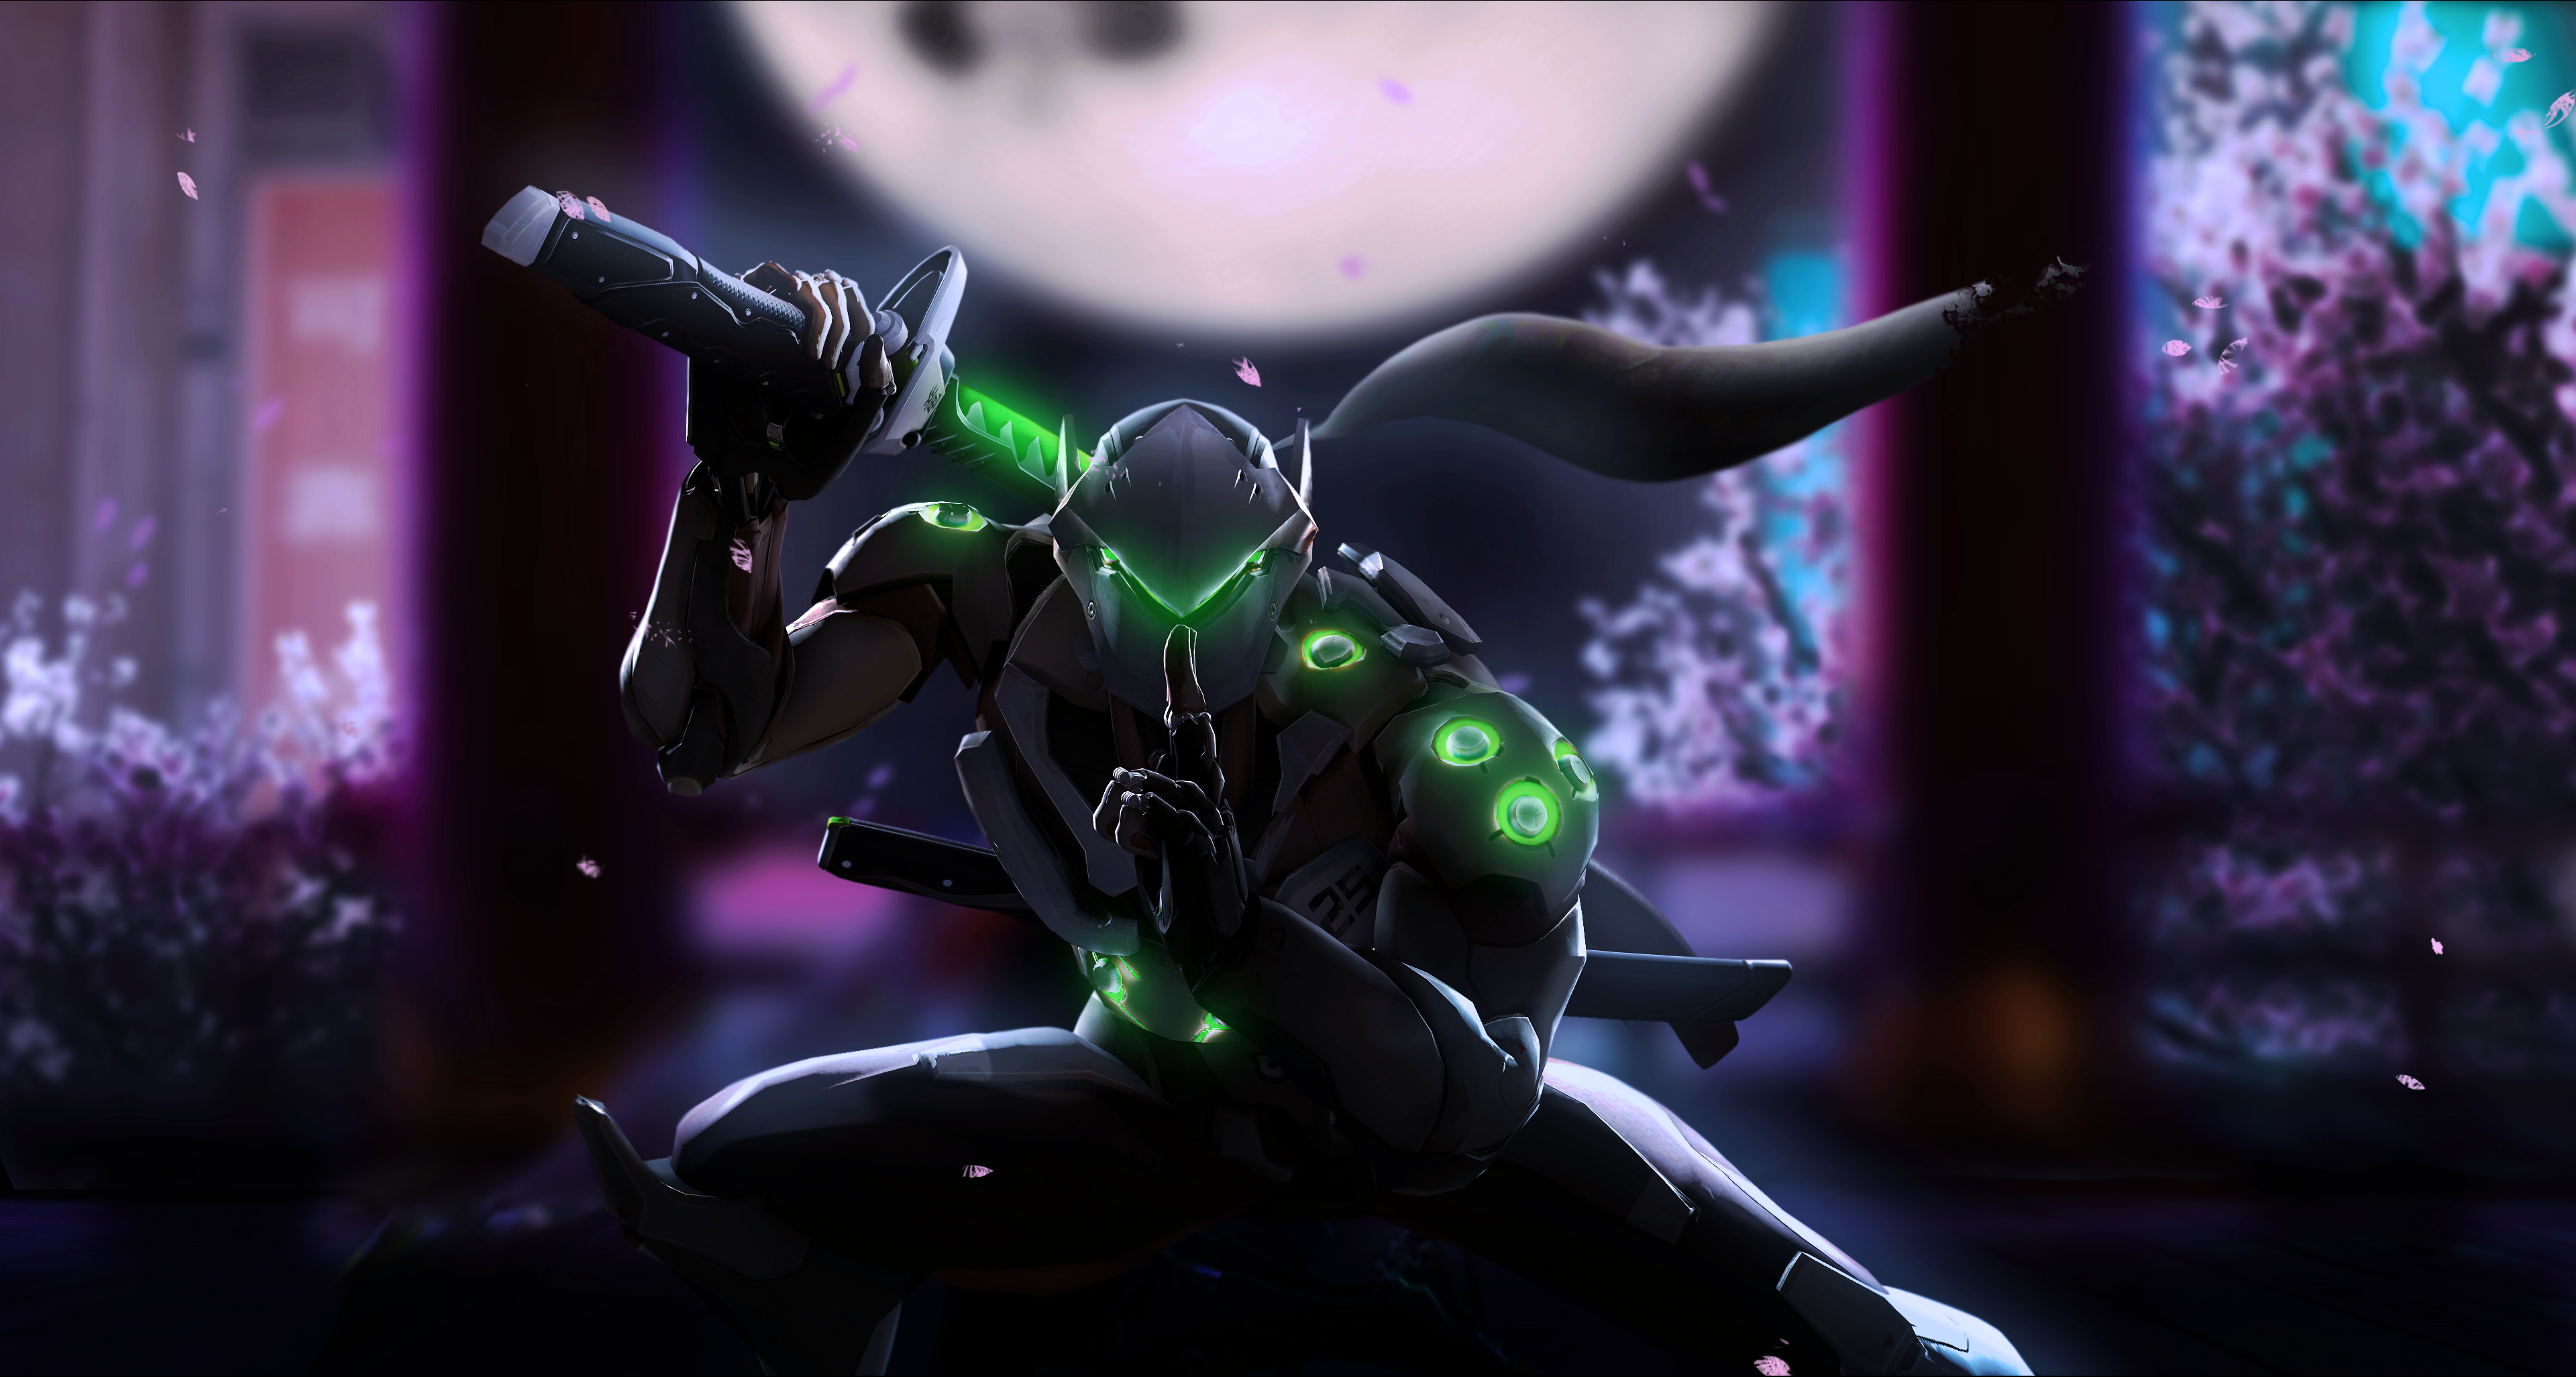 160+ Genji (Overwatch) HD Wallpapers and Backgrounds